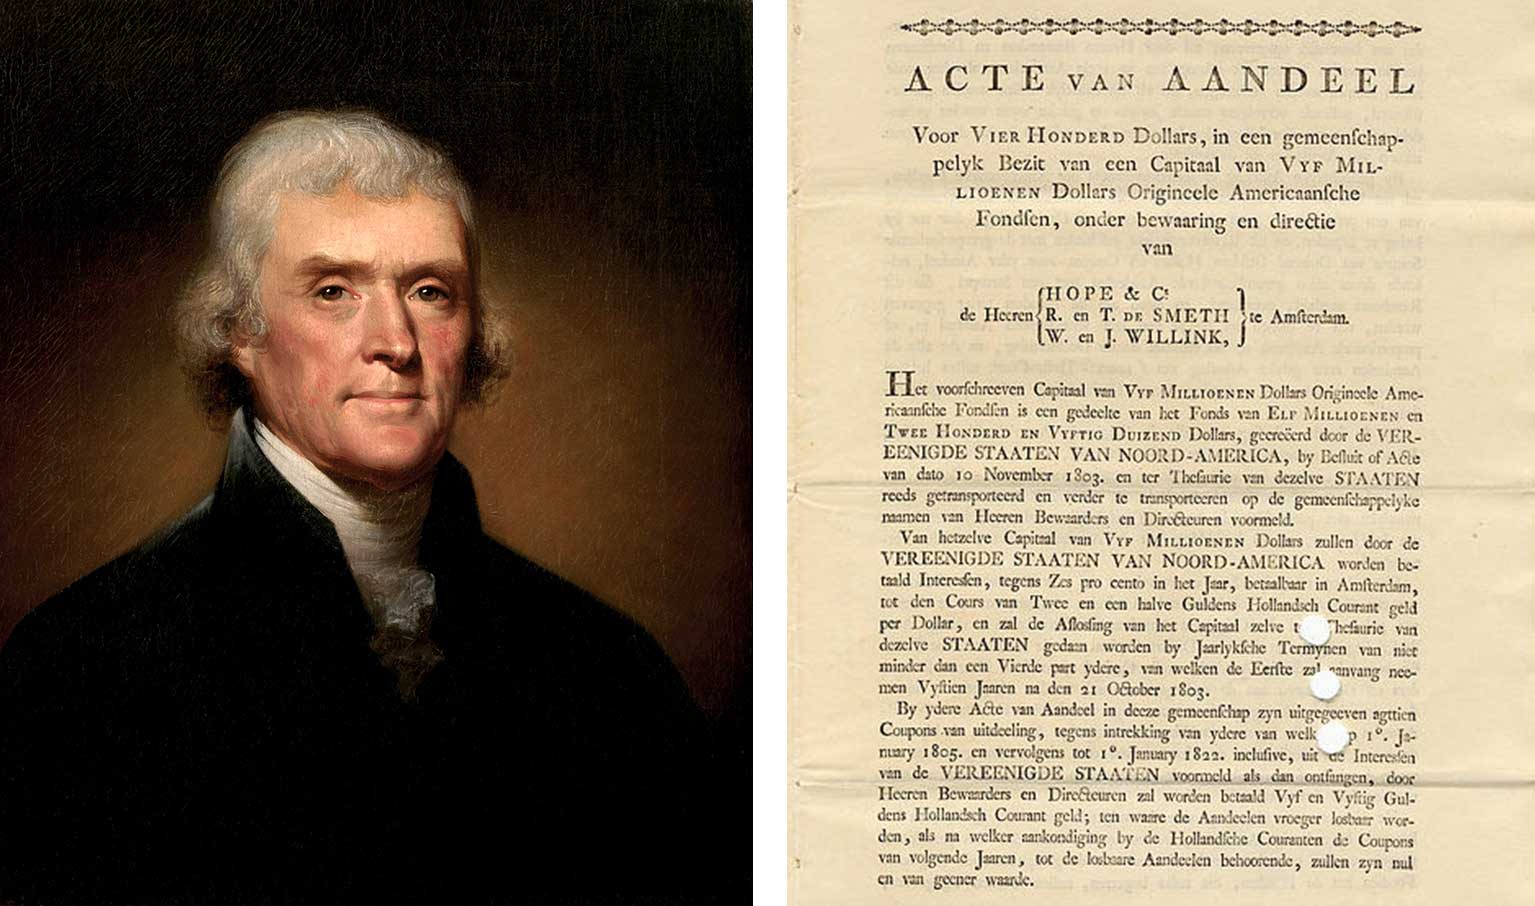 Left: Thomas Jefferson by Rembrandt Peale. Right: A share by Hope & Co to finance the Louisiana Purchase